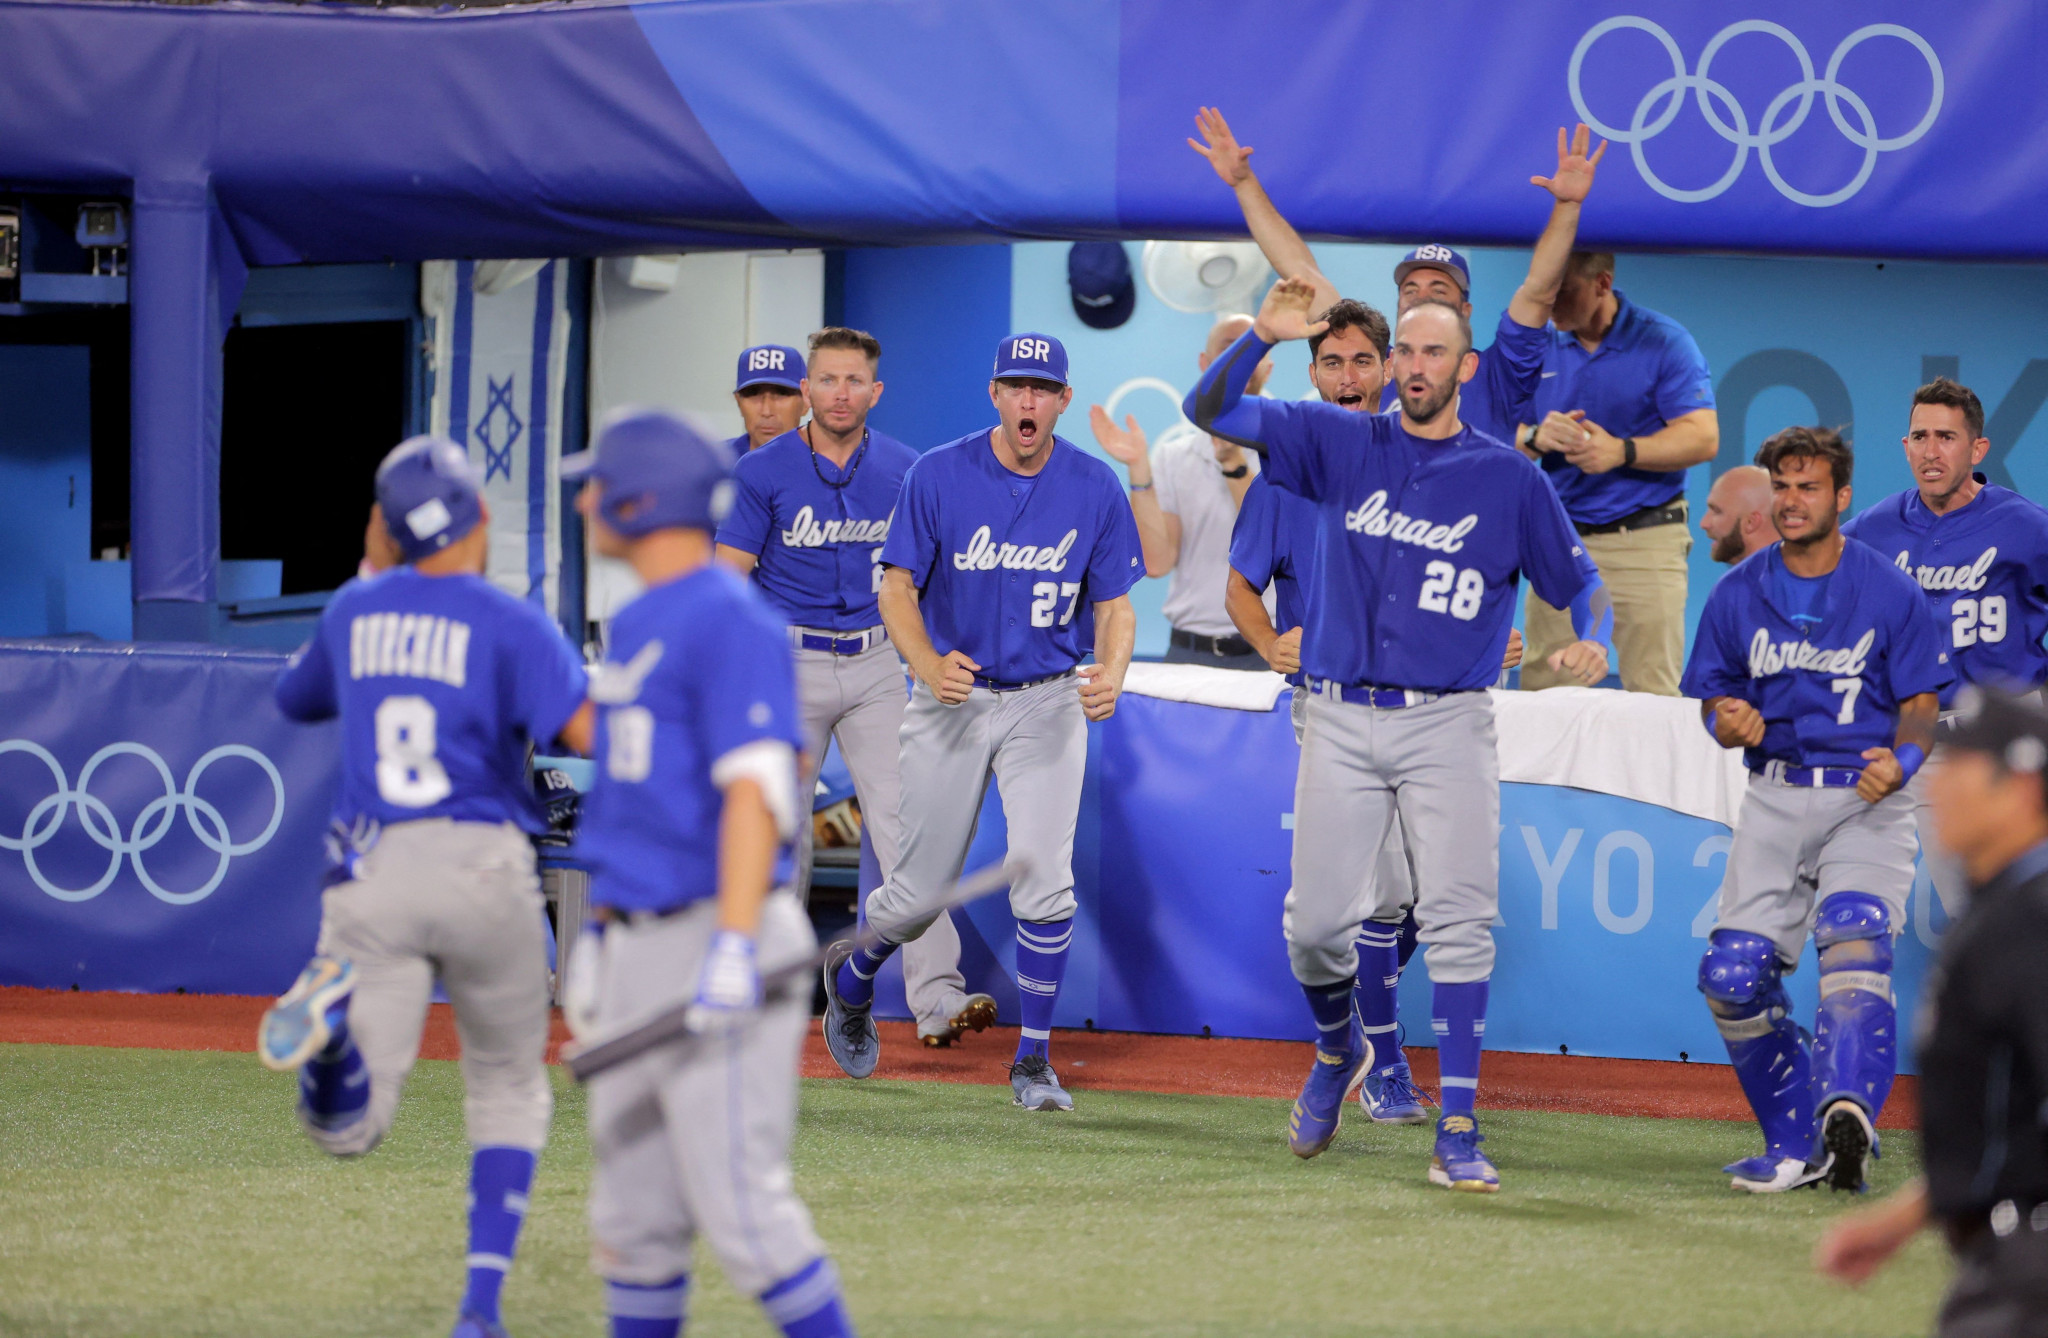 Ben Wagner was part of the Israel team that competed at the men's baseball event at the Tokyo 2020 Olympics ©Getty Images